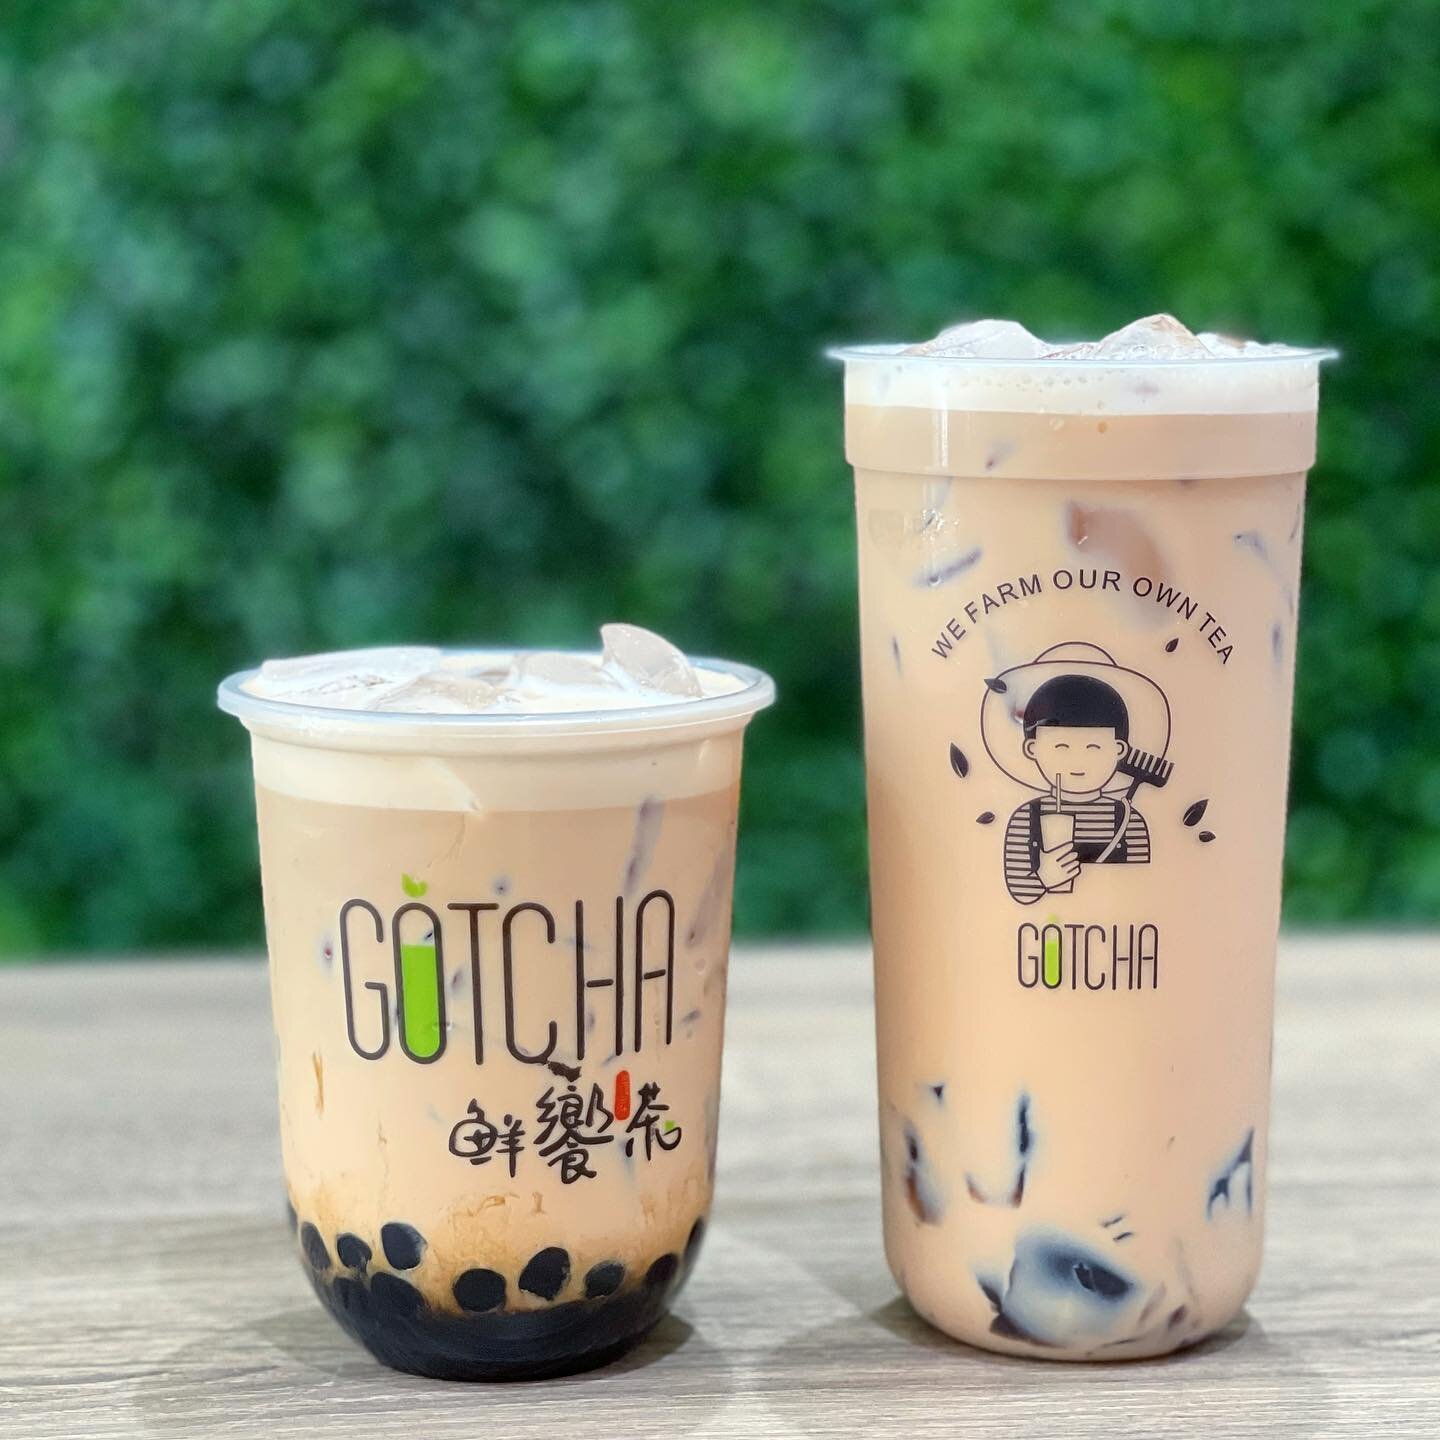 🧋Extended Special 50% off!🧋 come enjoy our Golden Milk Tea special, now extended for a limited time! While supplies last. #gotcharosemead
&mdash;
🏷 Tag us @gotcharosemead
❤️ Find us on @ubereats, @doordash, and @grubhub !